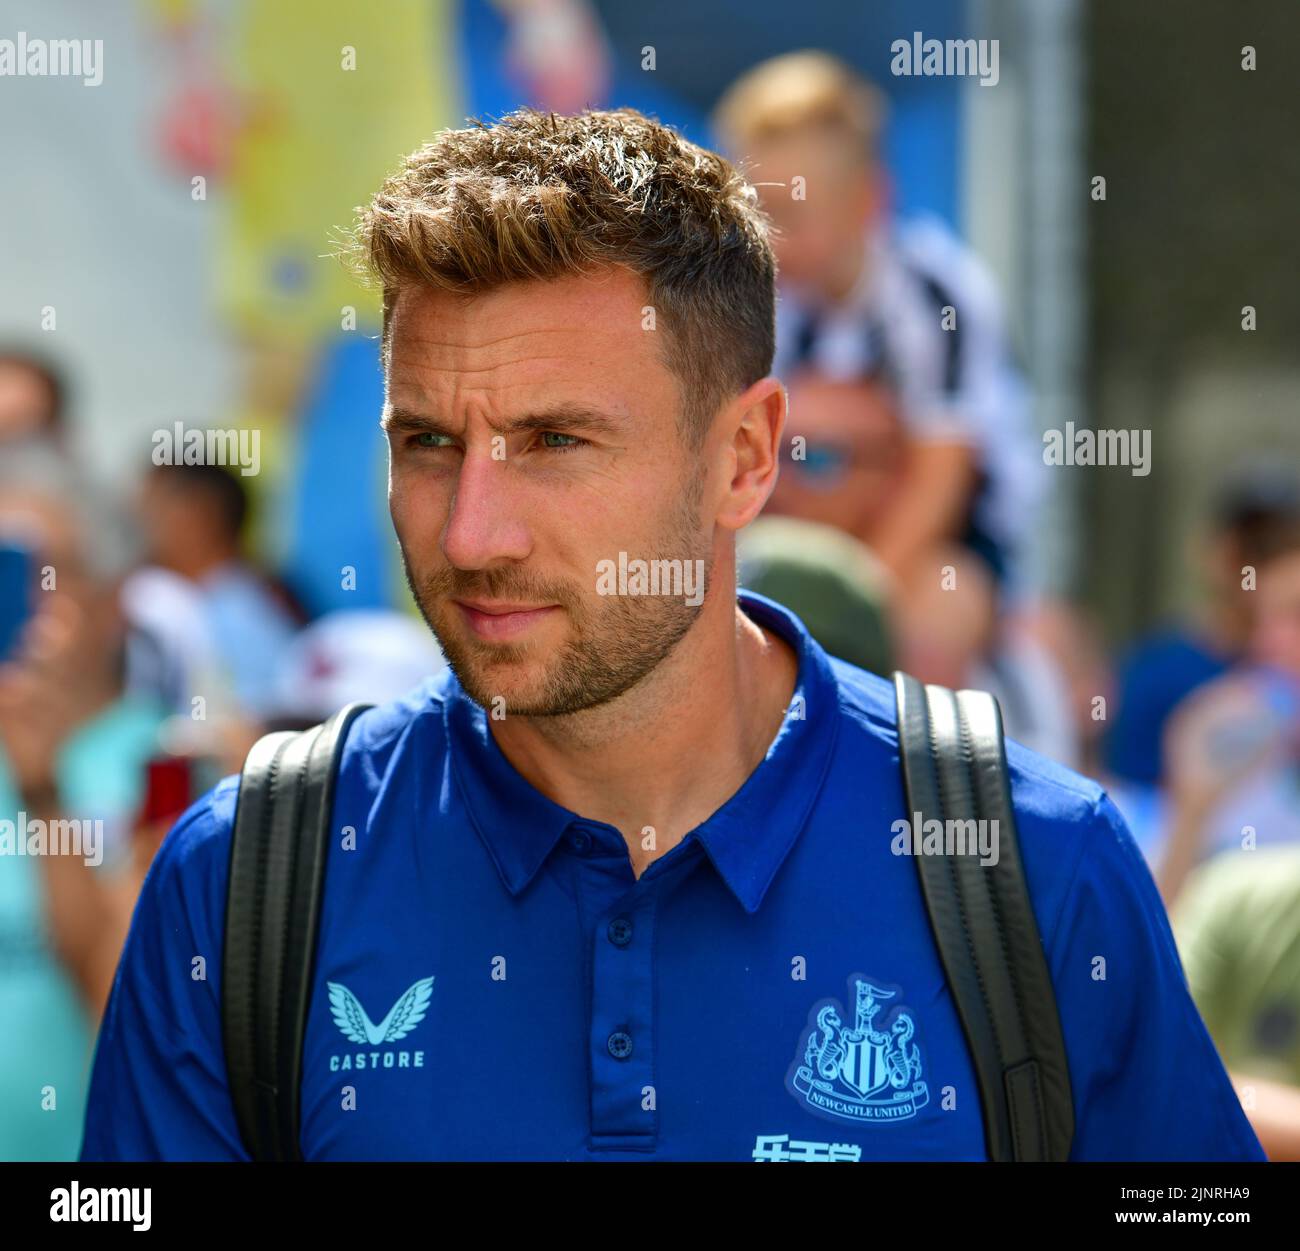 Brighton, UK. 13th Aug, 2022. Paul Dummett of Newcastle United arrives for the Premier League match between Brighton & Hove Albion and Newcastle United at The Amex on August 13th 2022 in Brighton, England. (Photo by Jeff Mood/phcimages.com) Credit: PHC Images/Alamy Live News Stock Photo